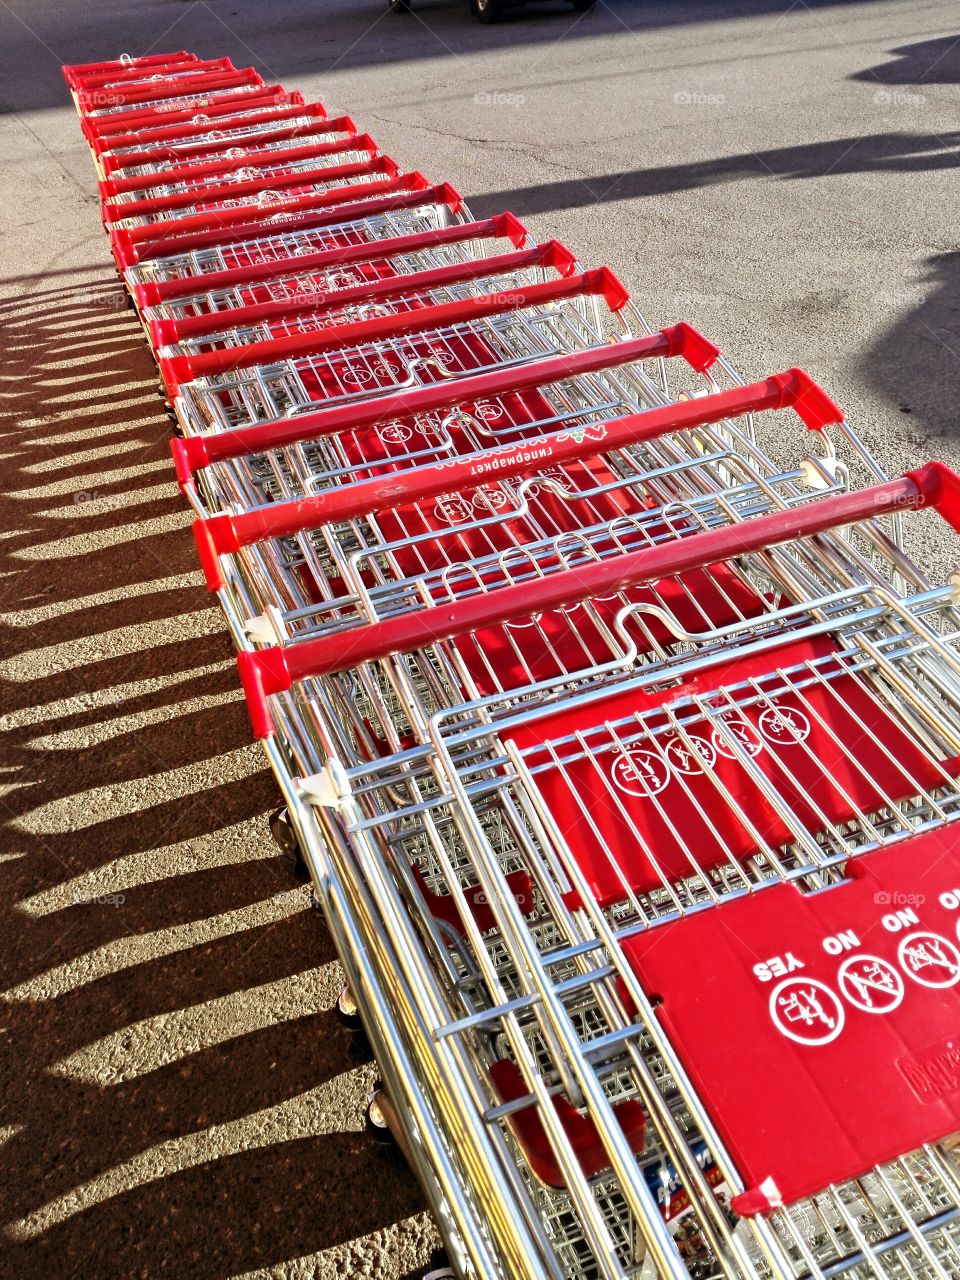 Shopping carts in a row